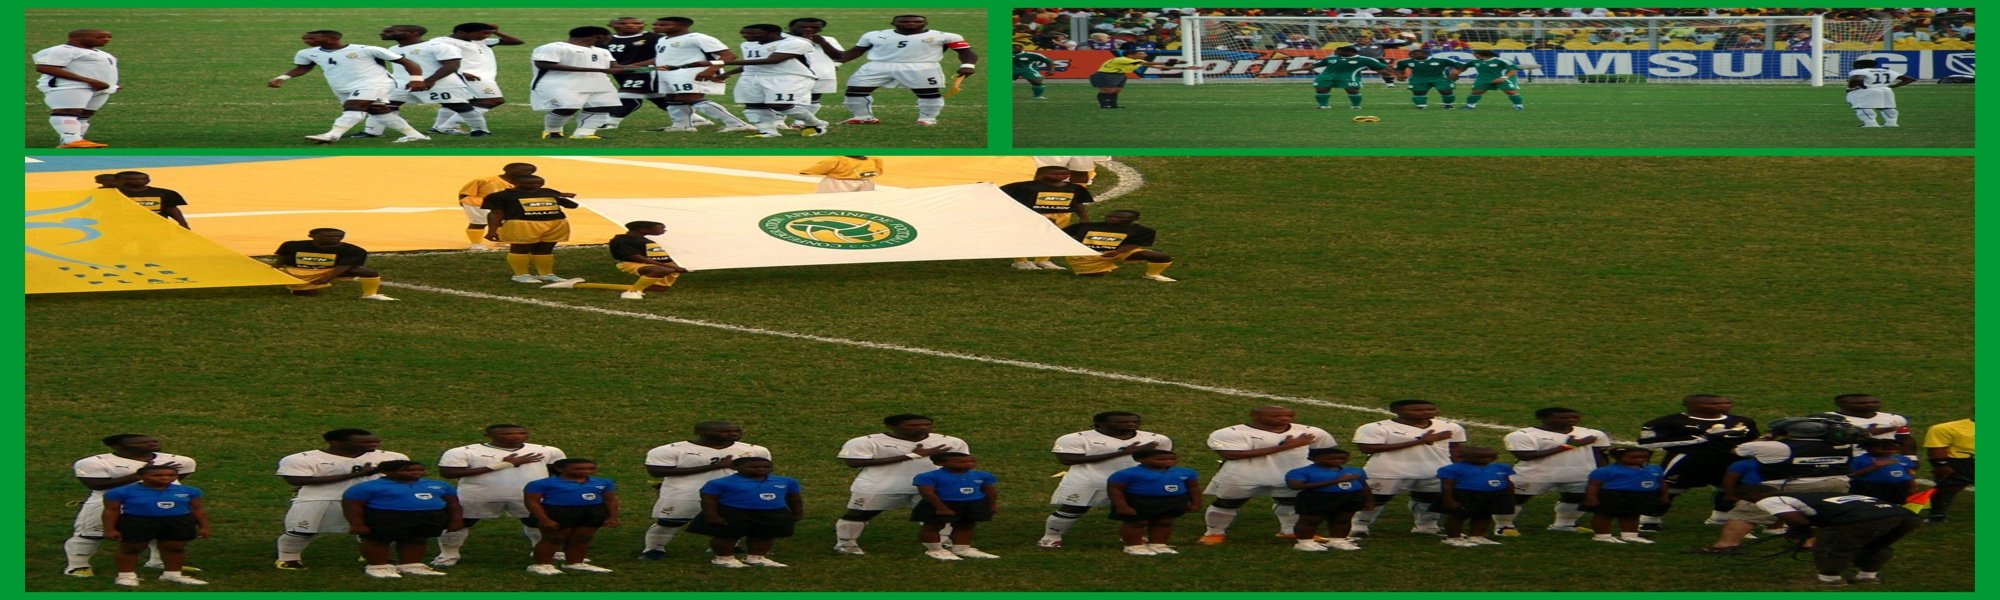 Black_Stars_Africa_Cup_of_Nations-2000x600.jpg